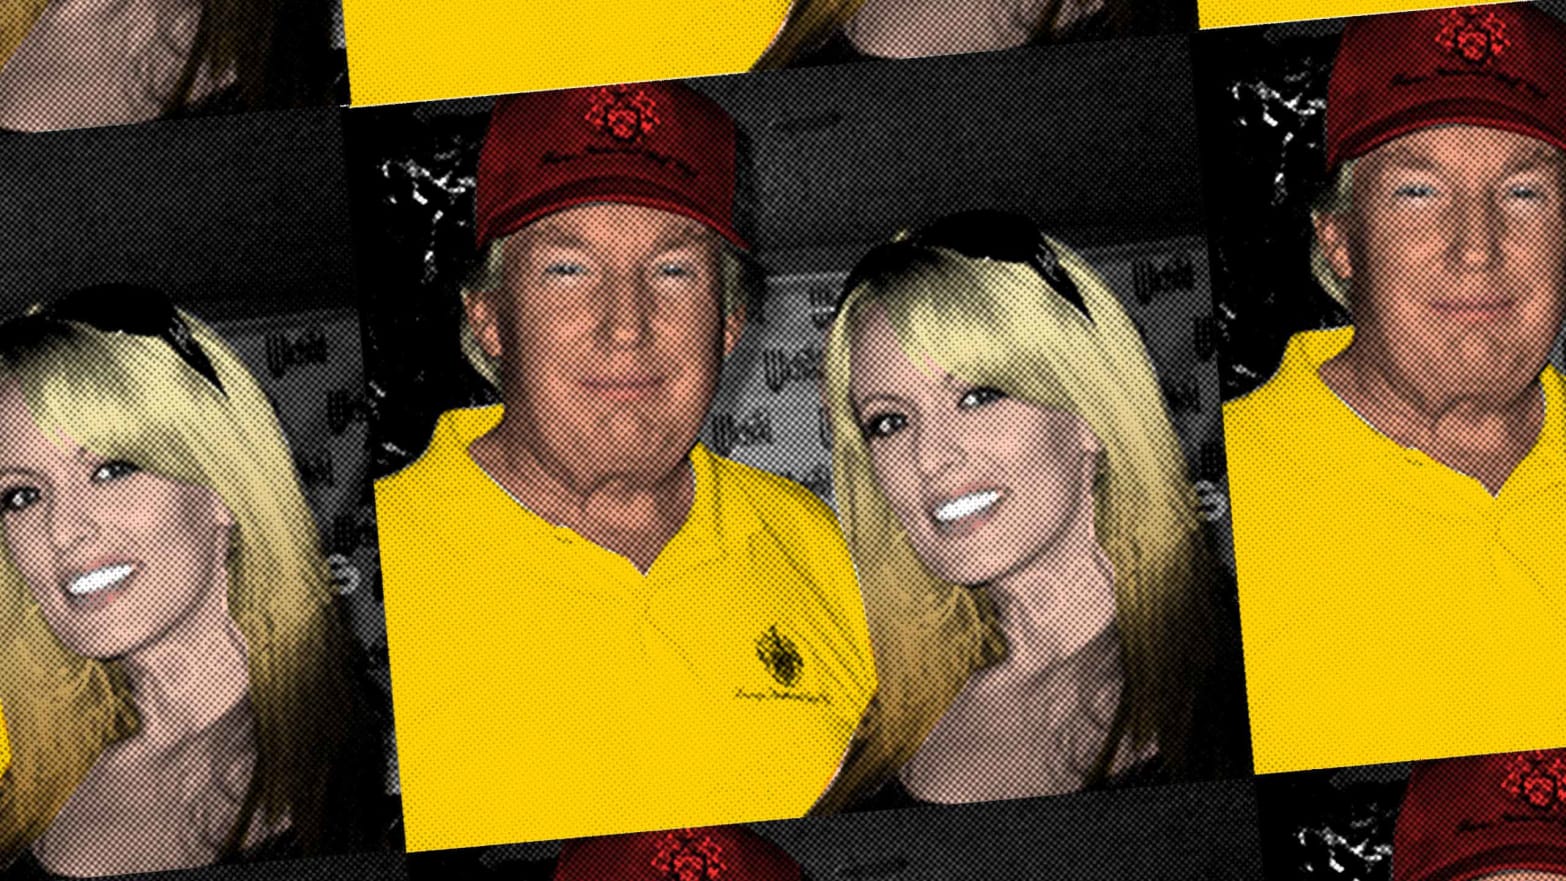 Golf Star Porn - Porn Star: Donald Trump and Stormy Daniels Invited Me to ...